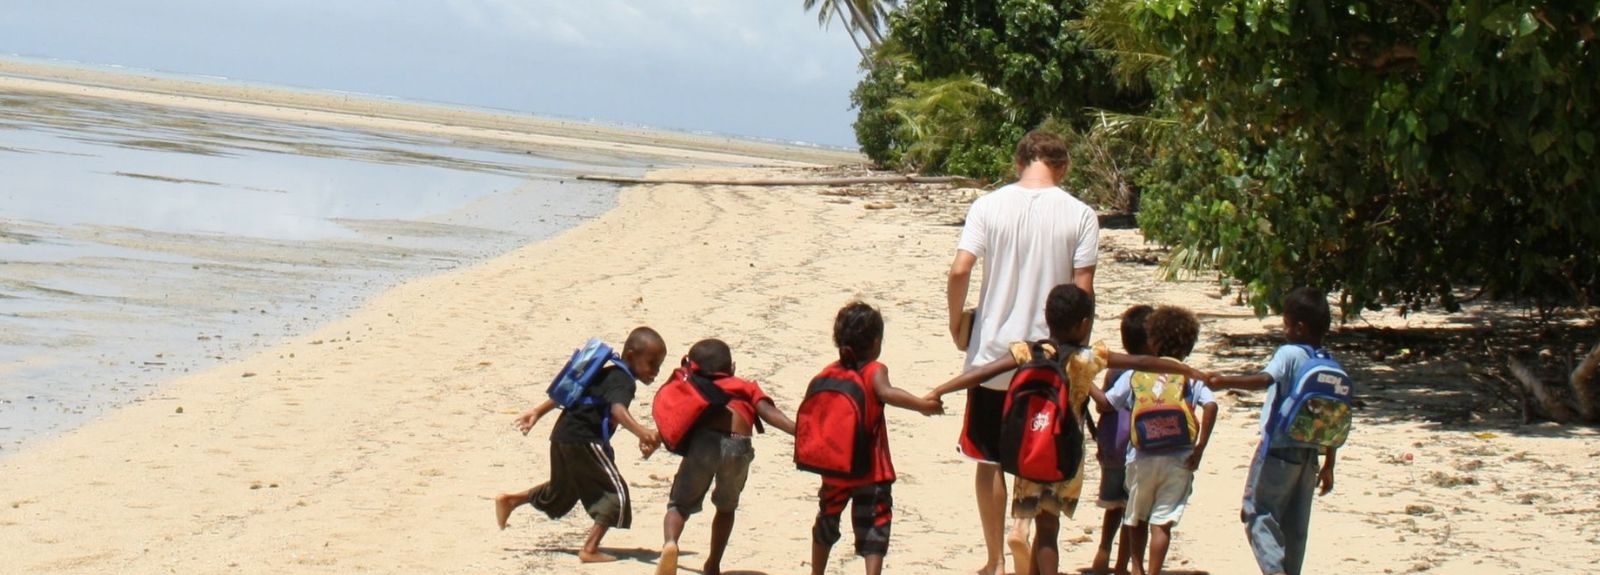 young male student volunteer on a beach leading a group of children